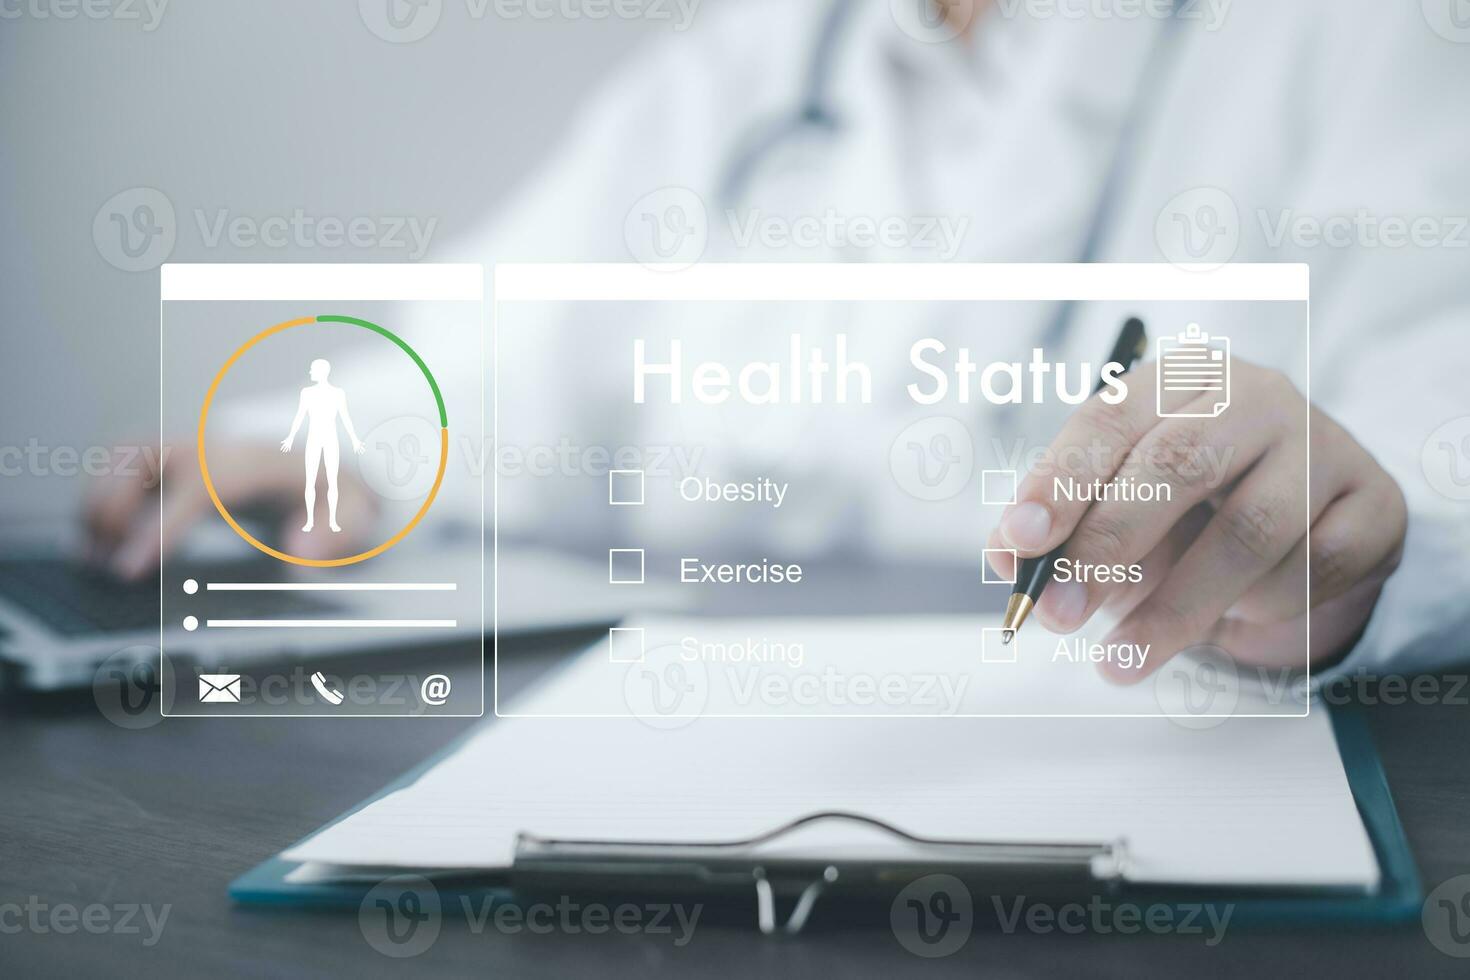 Medical doctor and medical technology and futuristic concept, Doctor using laptop and health medical network connection icon on virtual screen interface, Modern medical technology and innovation. photo